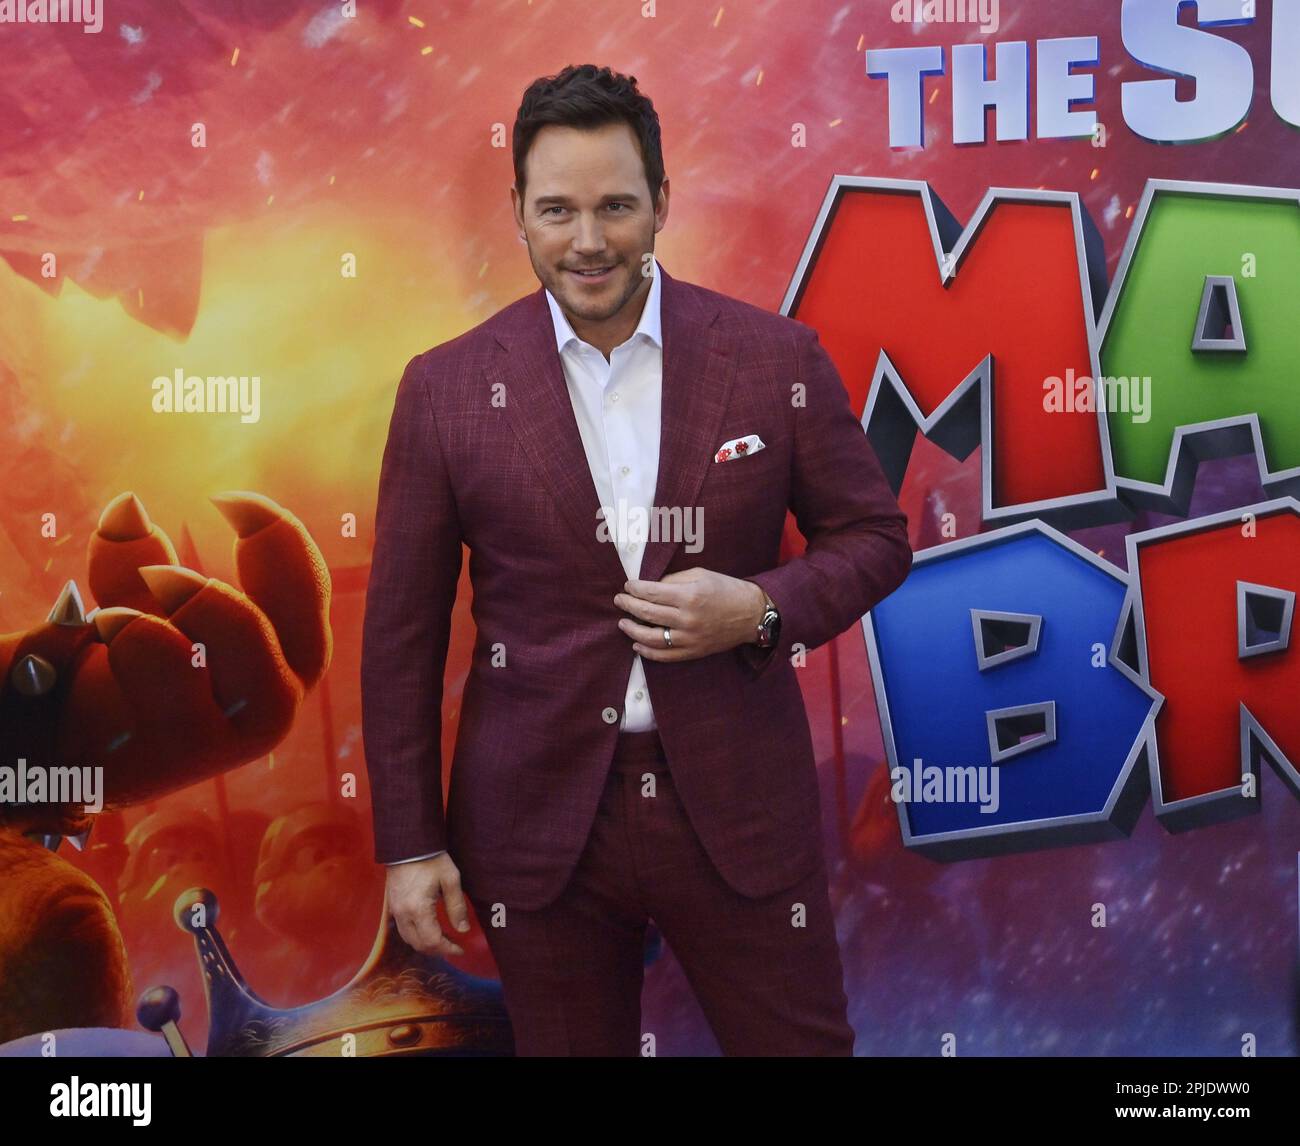 Los Angeles, United States. 01st Apr, 2023. Cast member Chris Pratt, the voice of Mario, attends the premiere of the animated sci-fi fantasy comedy motion picture 'The Super Mario Bros. Movie' at Regal L.A. Live in Los Angeles on Saturday, April 1, 2023. Storyline: A Brooklyn plumber named Mario travels through the Mushroom Kingdom with a princess named Peach and an anthropomorphic mushroom named Toad to find Mario's brother, Luigi, and to save the world from a ruthless fire-breathing Koopa named Bowser. Photo by Jim Ruymen/UPI Credit: UPI/Alamy Live News Stock Photo